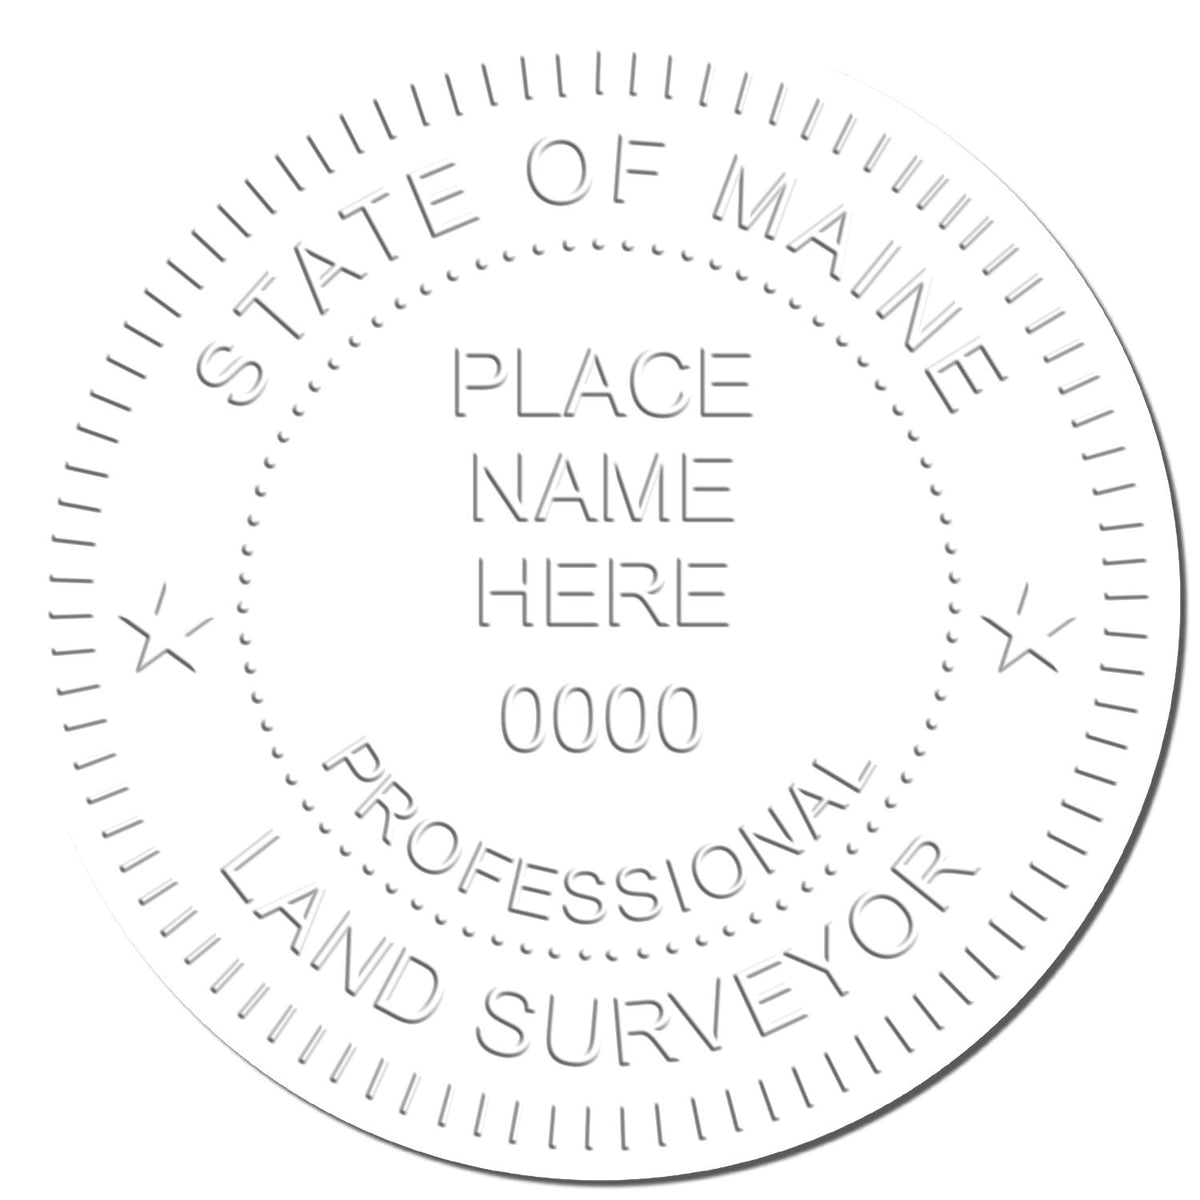 This paper is stamped with a sample imprint of the Handheld Maine Land Surveyor Seal, signifying its quality and reliability.